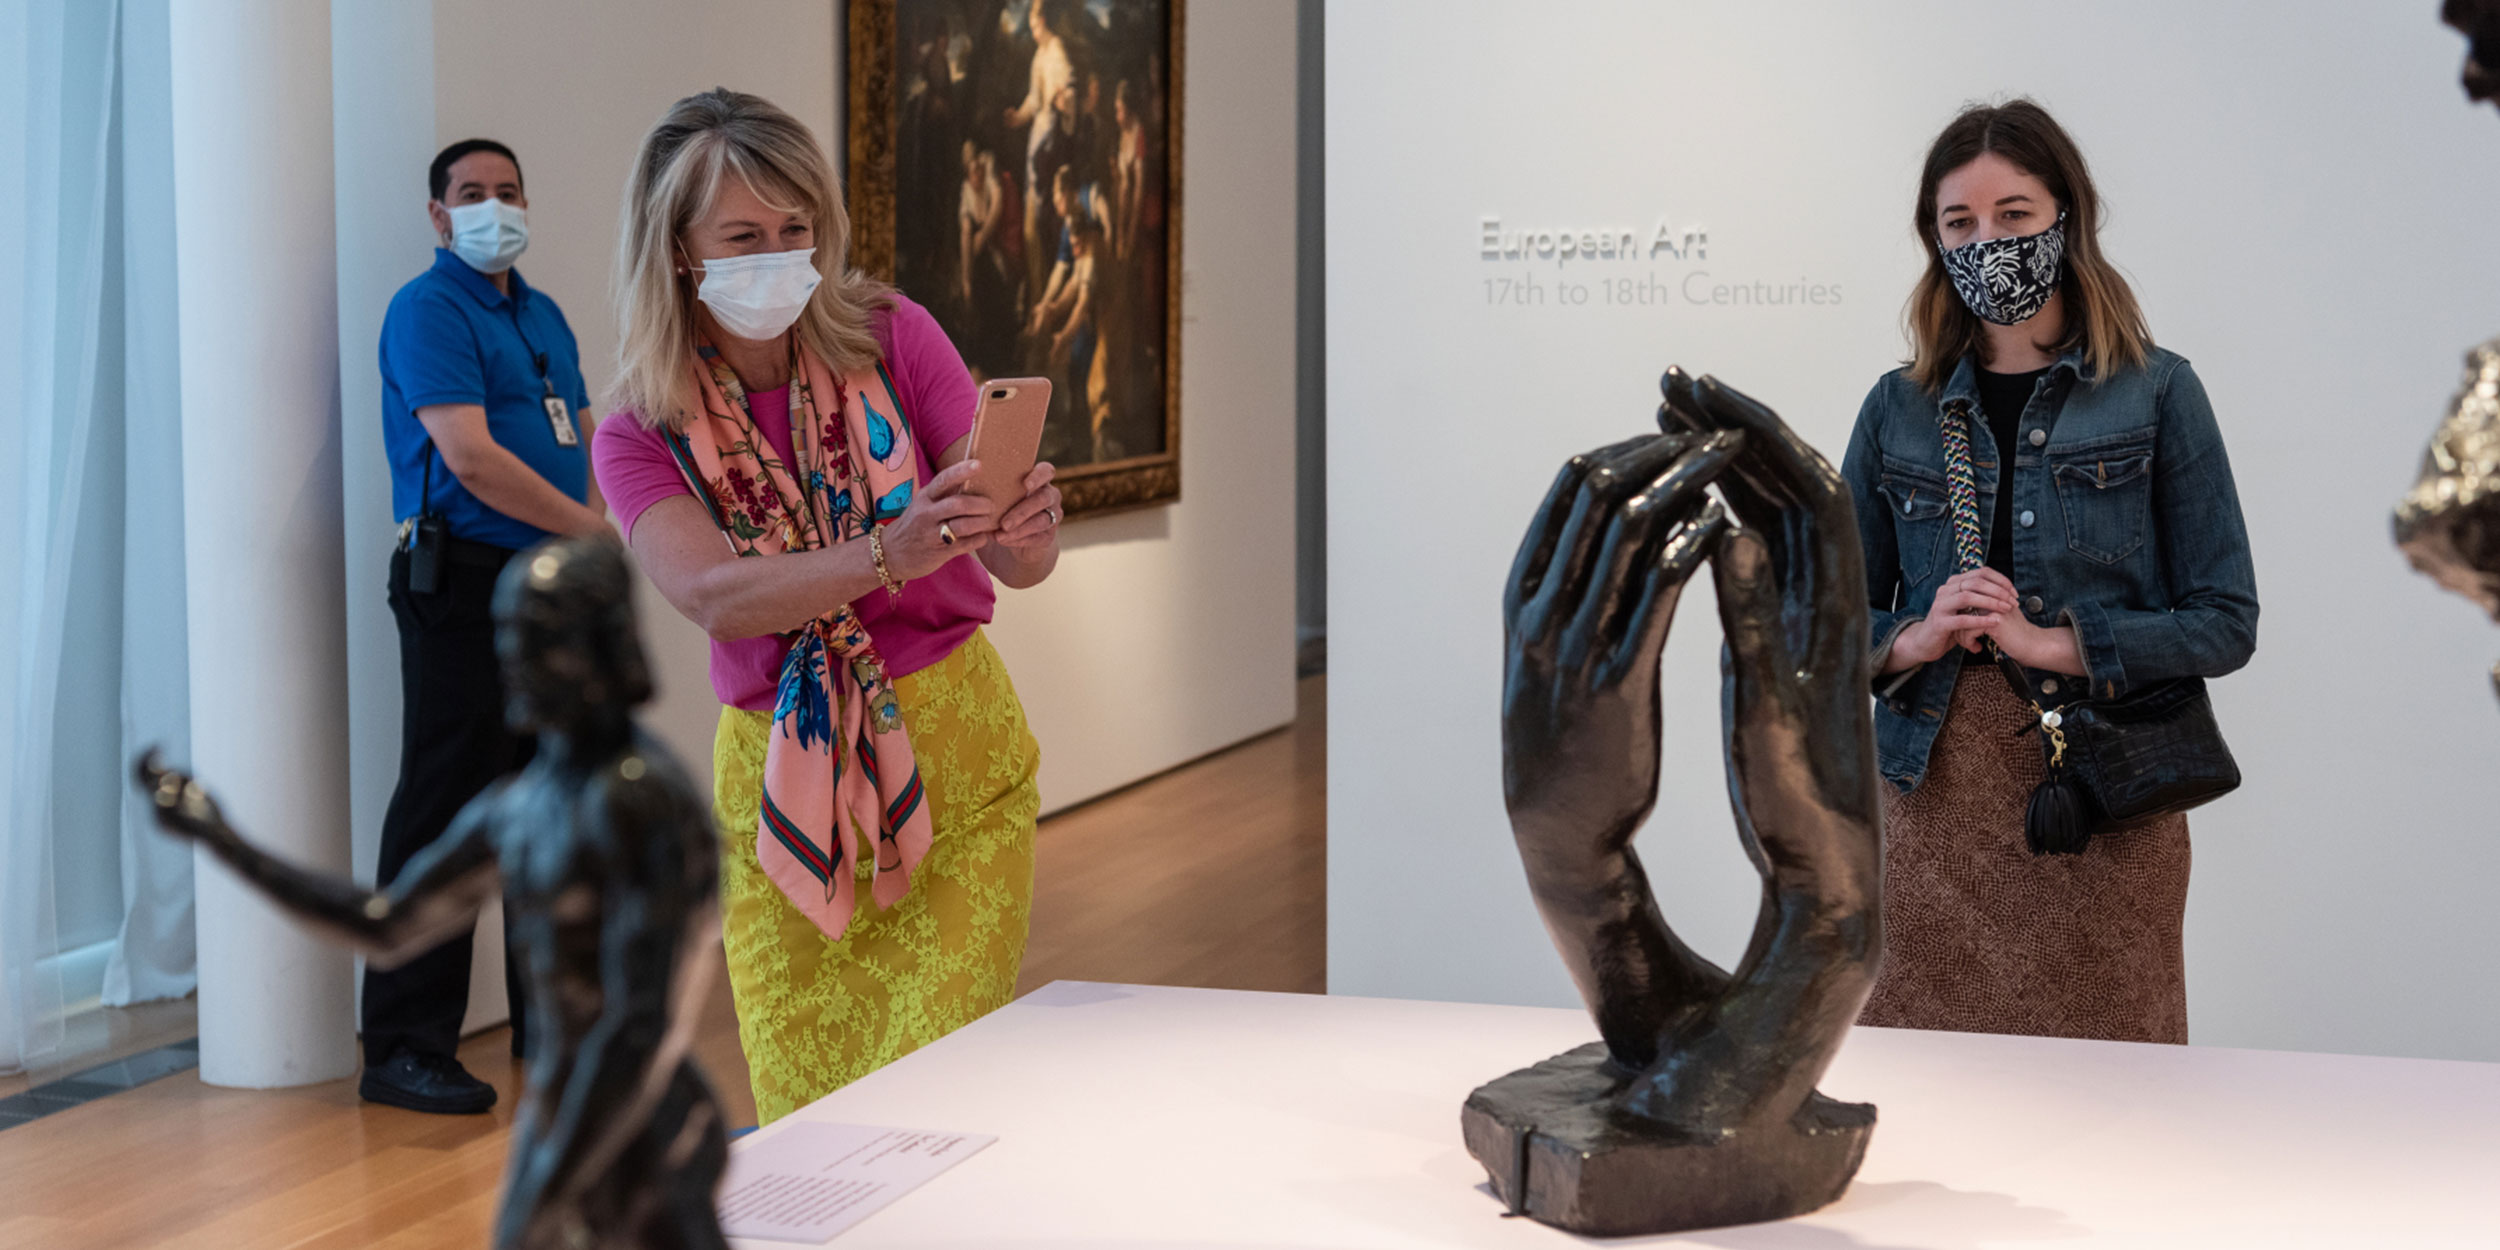 A woman in vibrant clothing takes a picture of a sculpture of two hands intertwining at a museum in Wake County